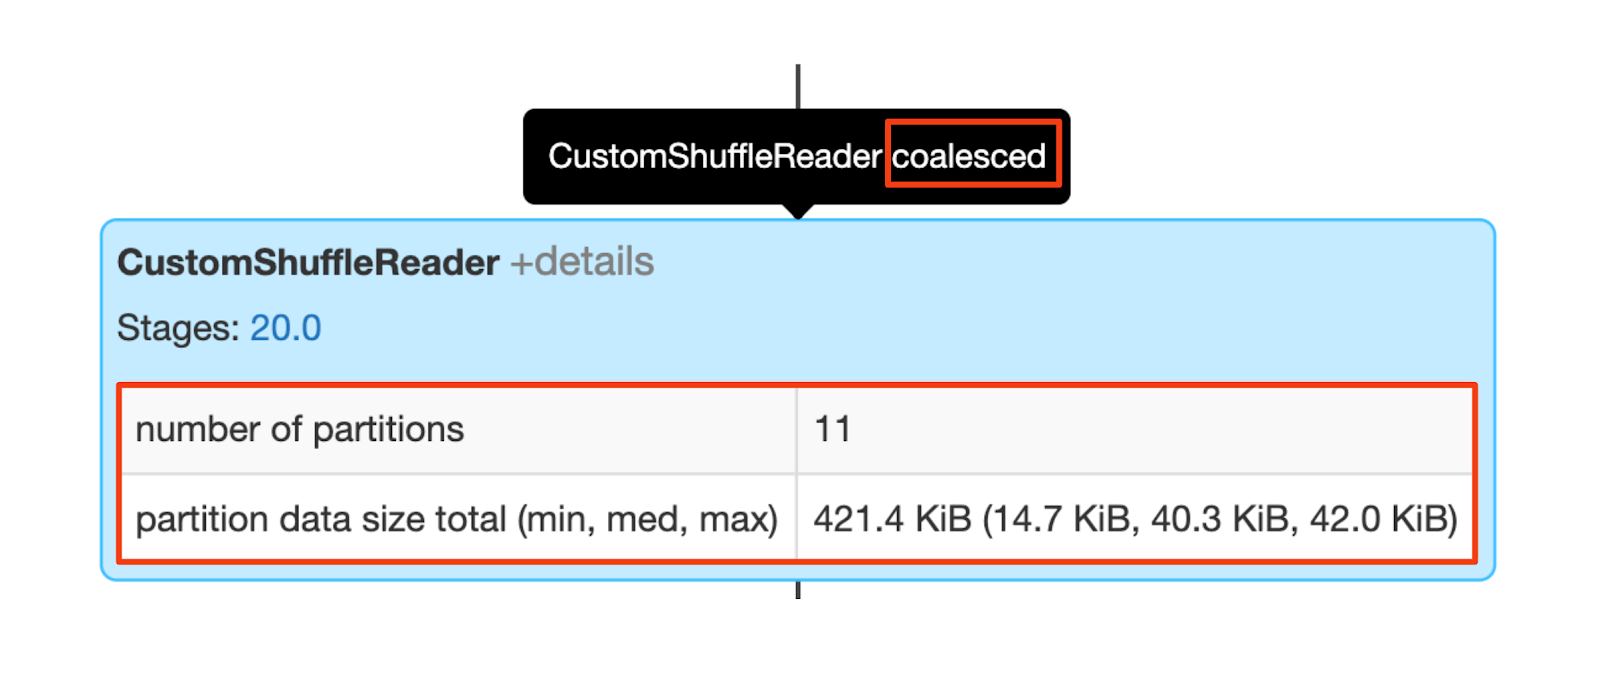 When the flag of CustomShuffleReader is `coalesced`, it means AQE has detected and coalesced small partitions after the shuffle based on the target partition size.